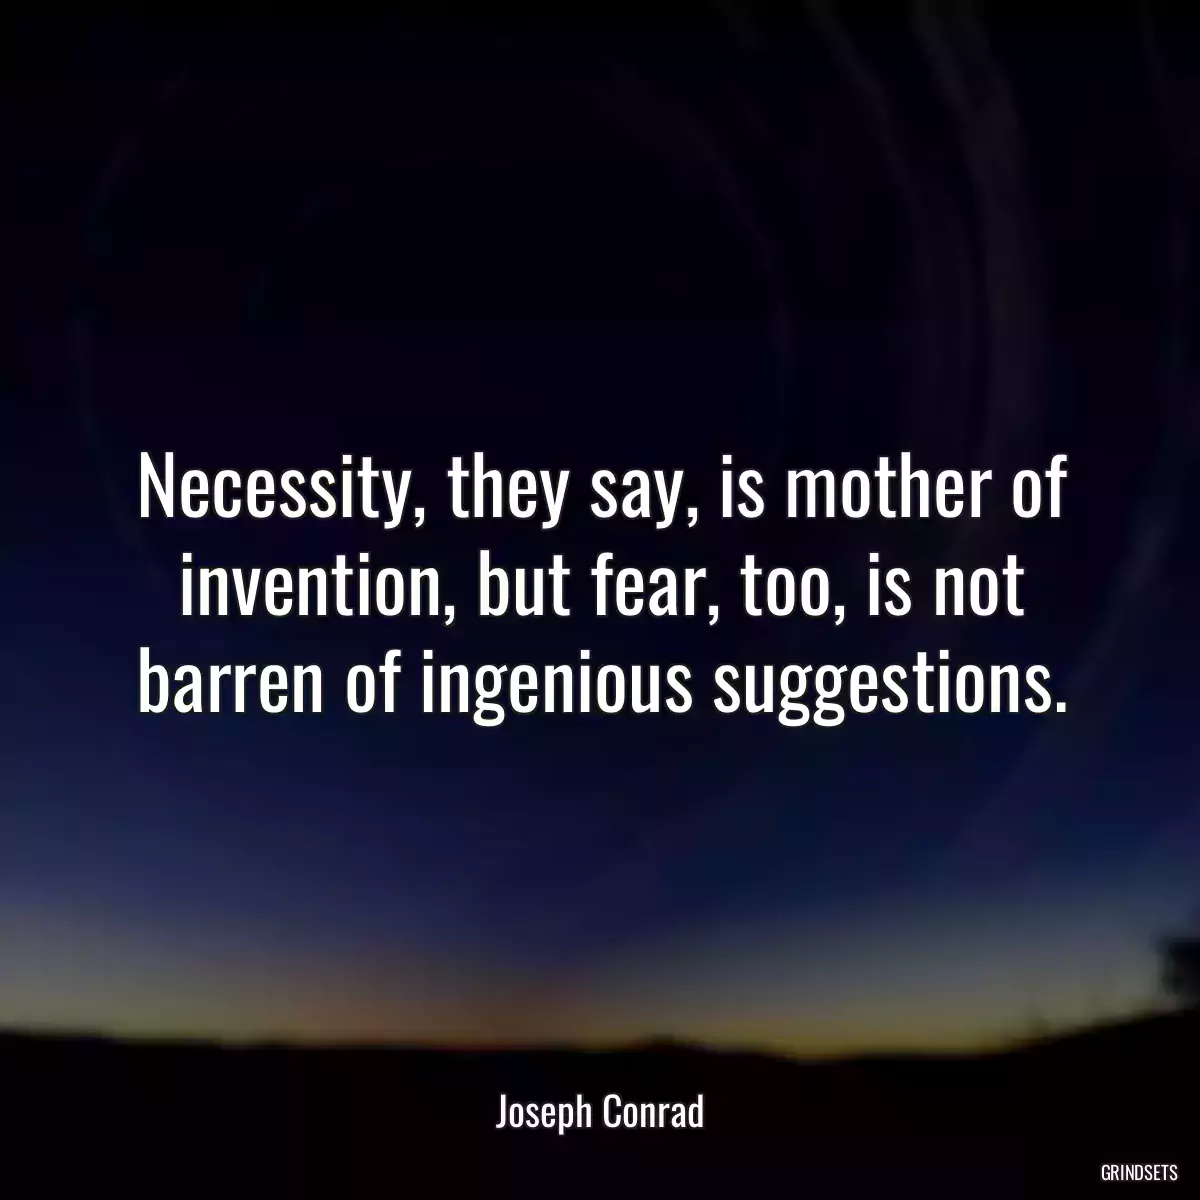 Necessity, they say, is mother of invention, but fear, too, is not barren of ingenious suggestions.